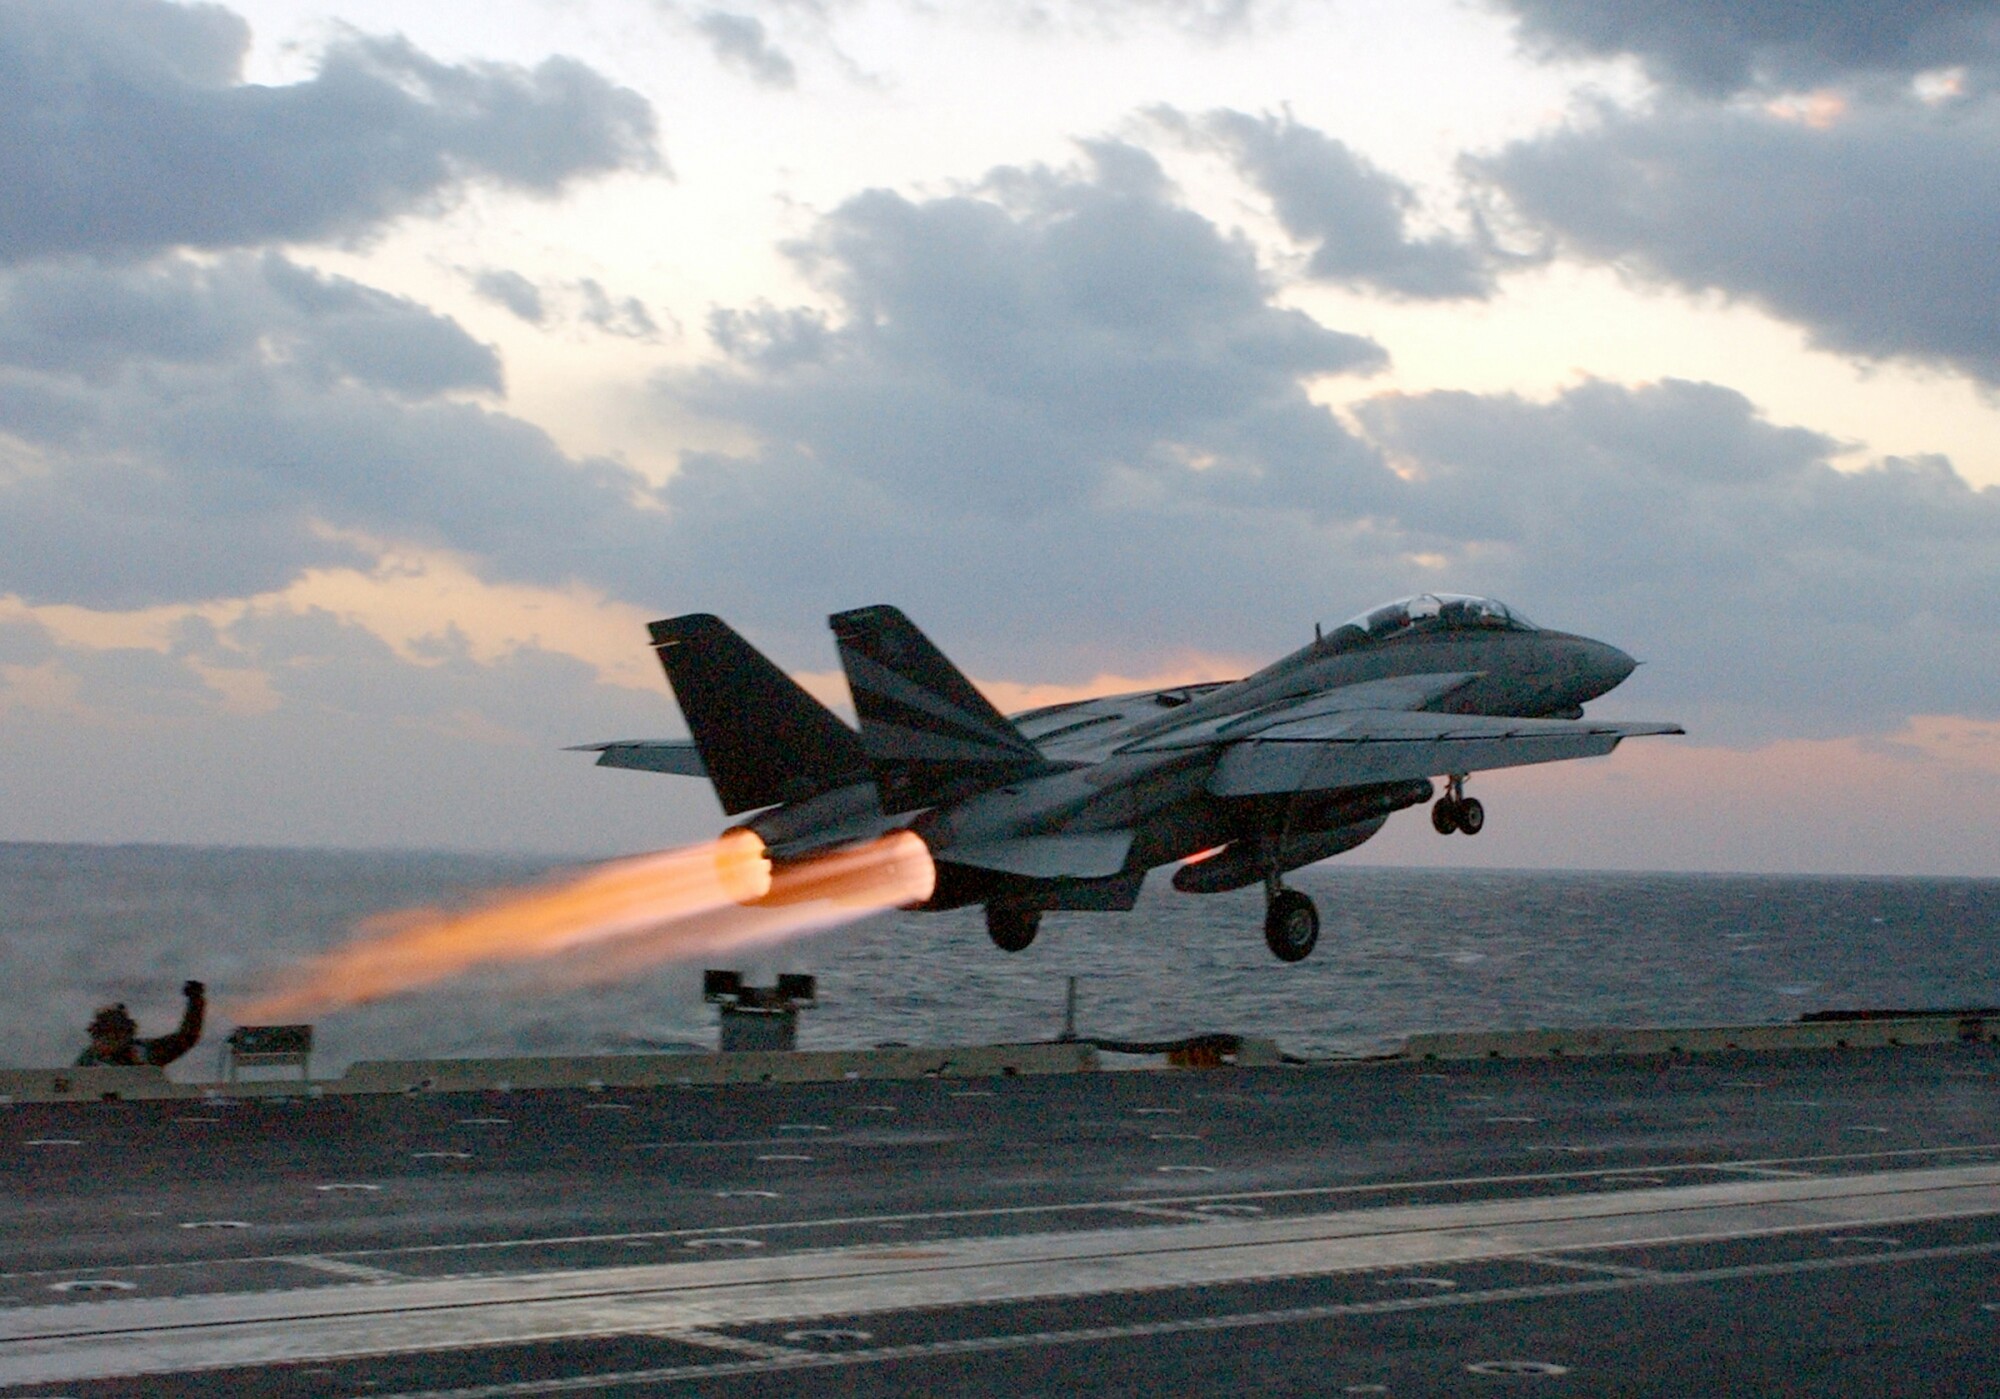 An F-14 Tomcat catapults off the bow of the Kitty Hawk